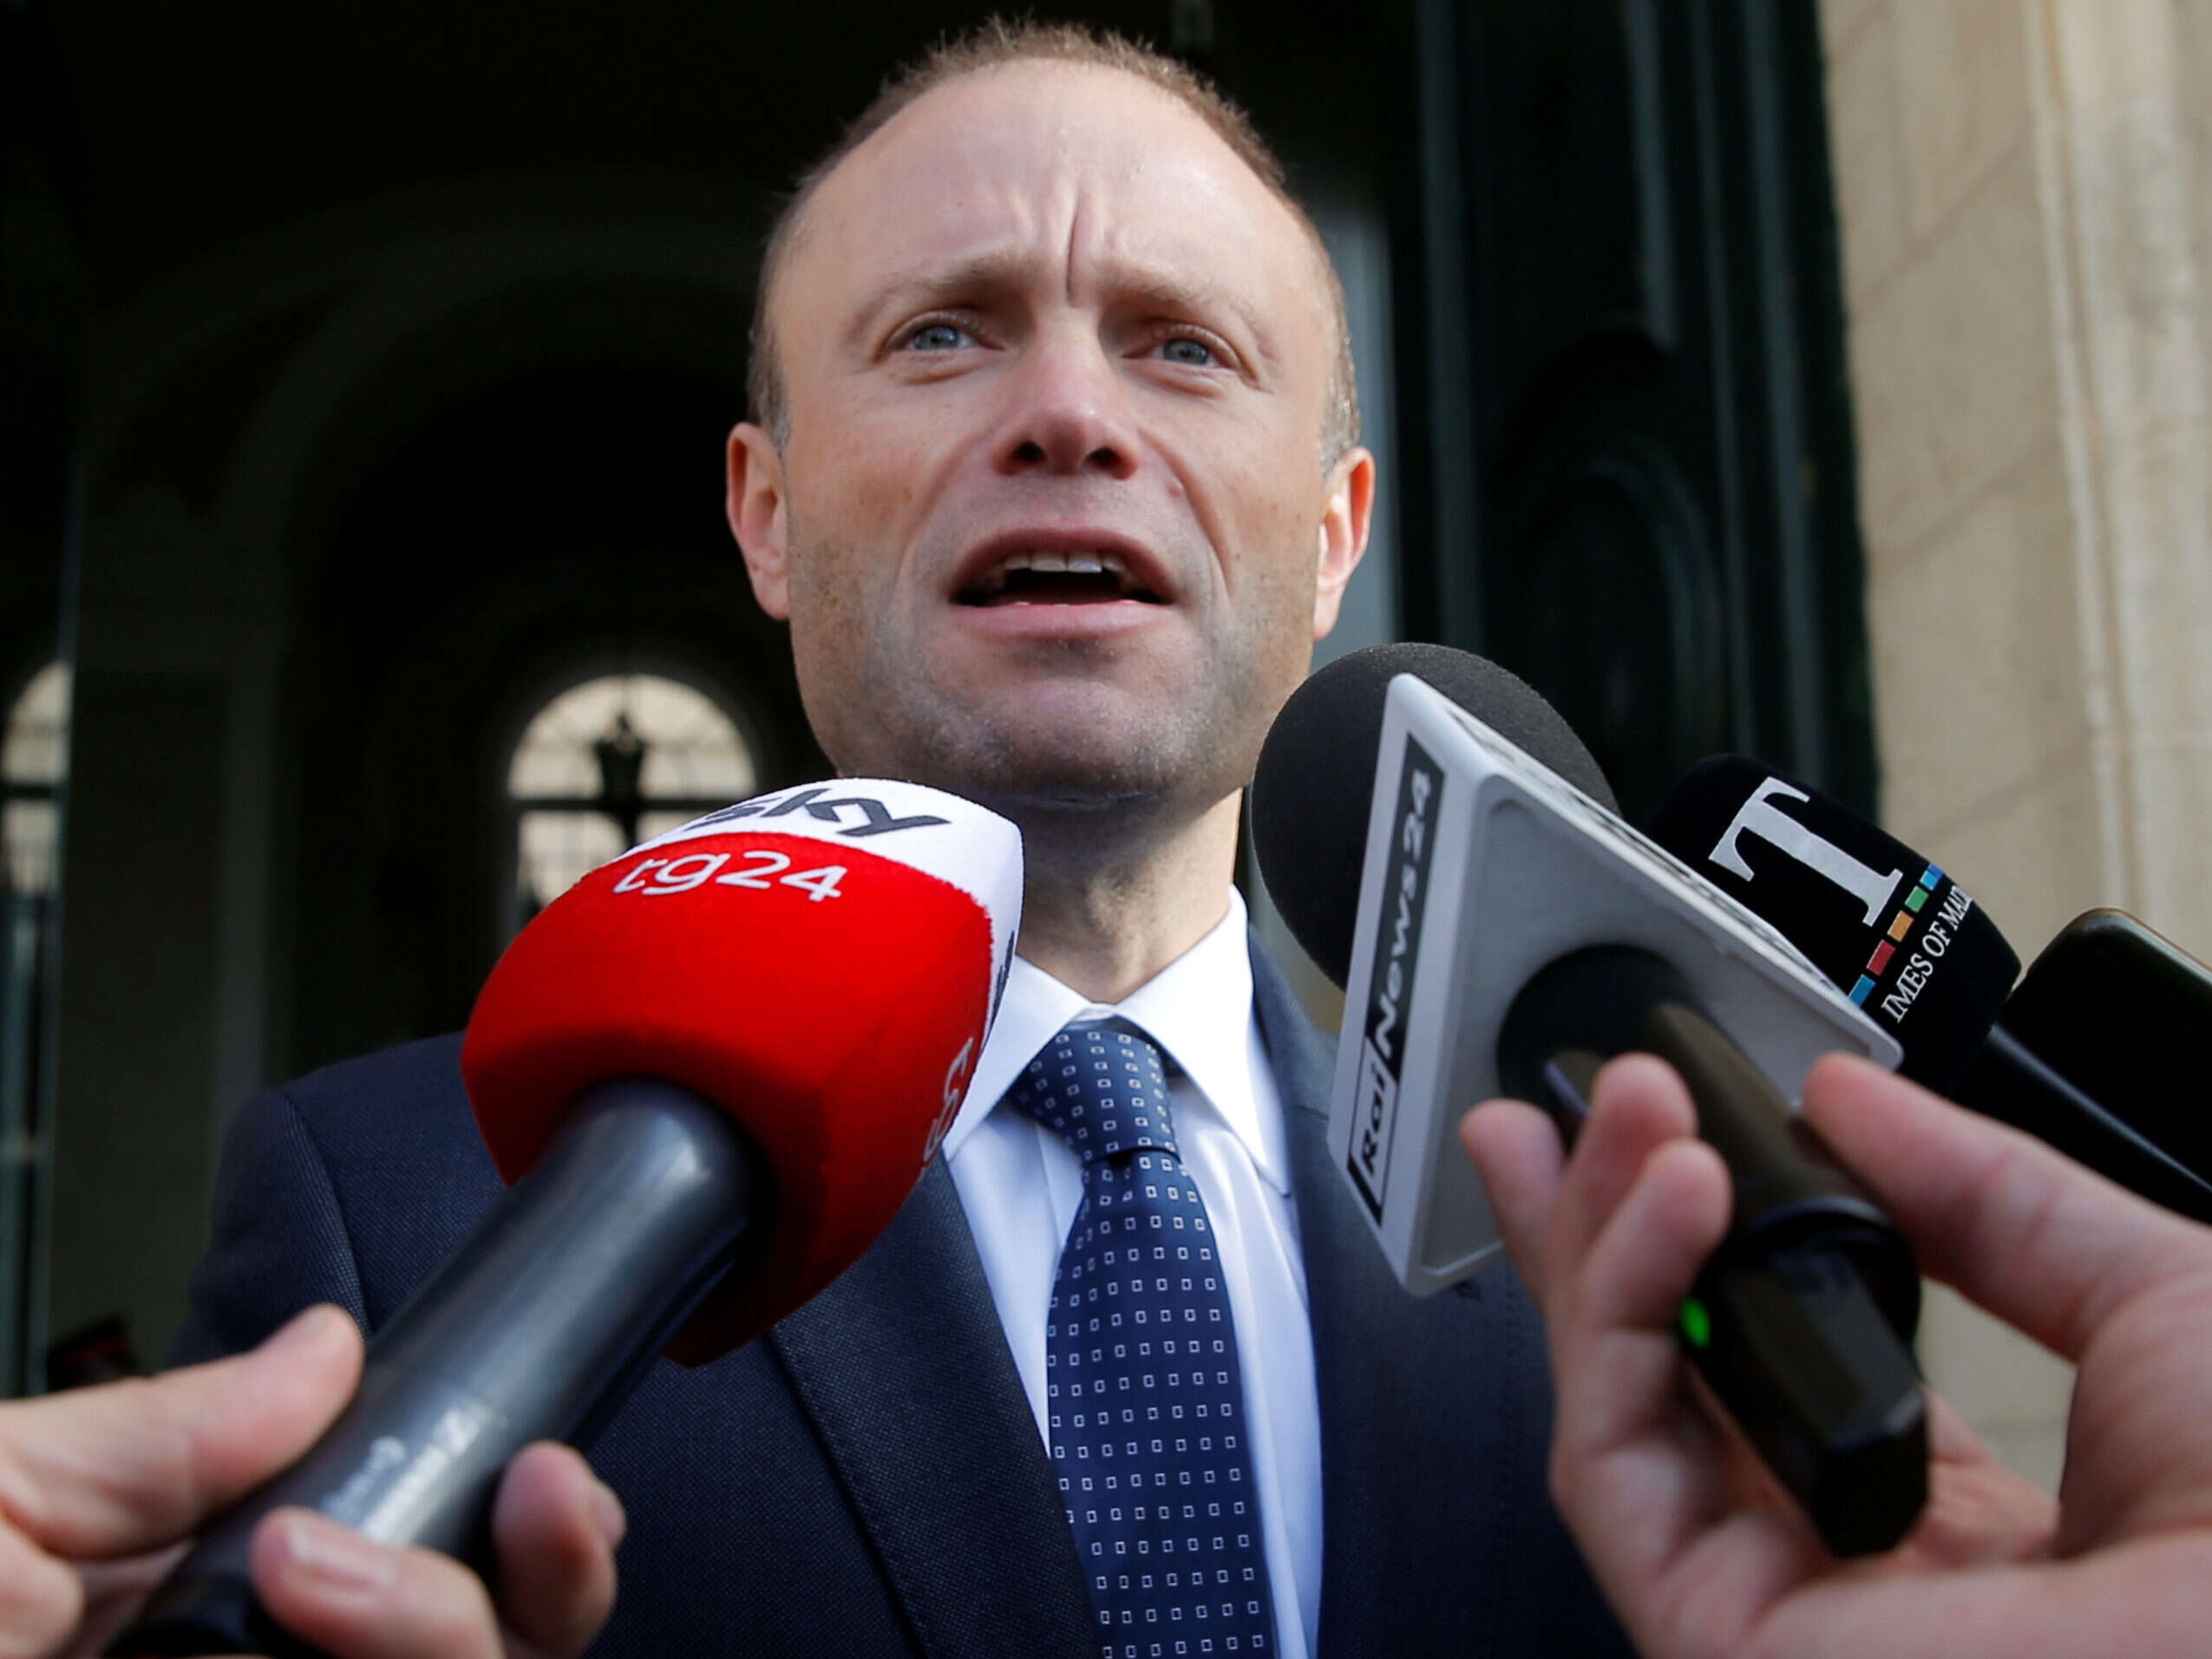 Maltese prime minister to step down amid protests urging truth about murder of journalist Daphne Caruana Galizia